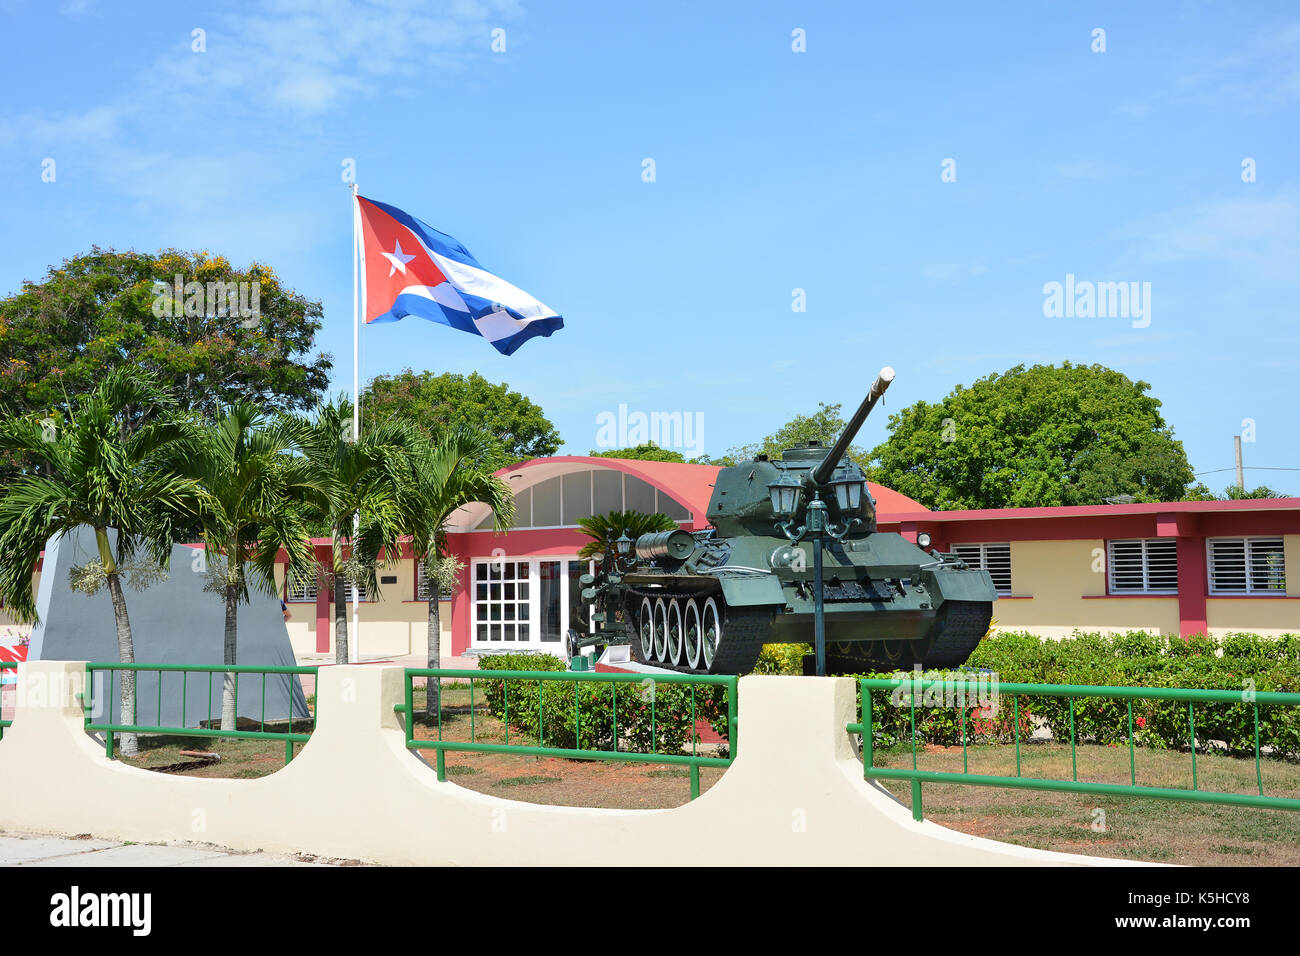 PLAYA GIRON, CUBA - JULY 24, 2016: The Bay of Pigs Museum. Tank and flag in front of the museum dedicated to the failed 1961 invasion. Stock Photo